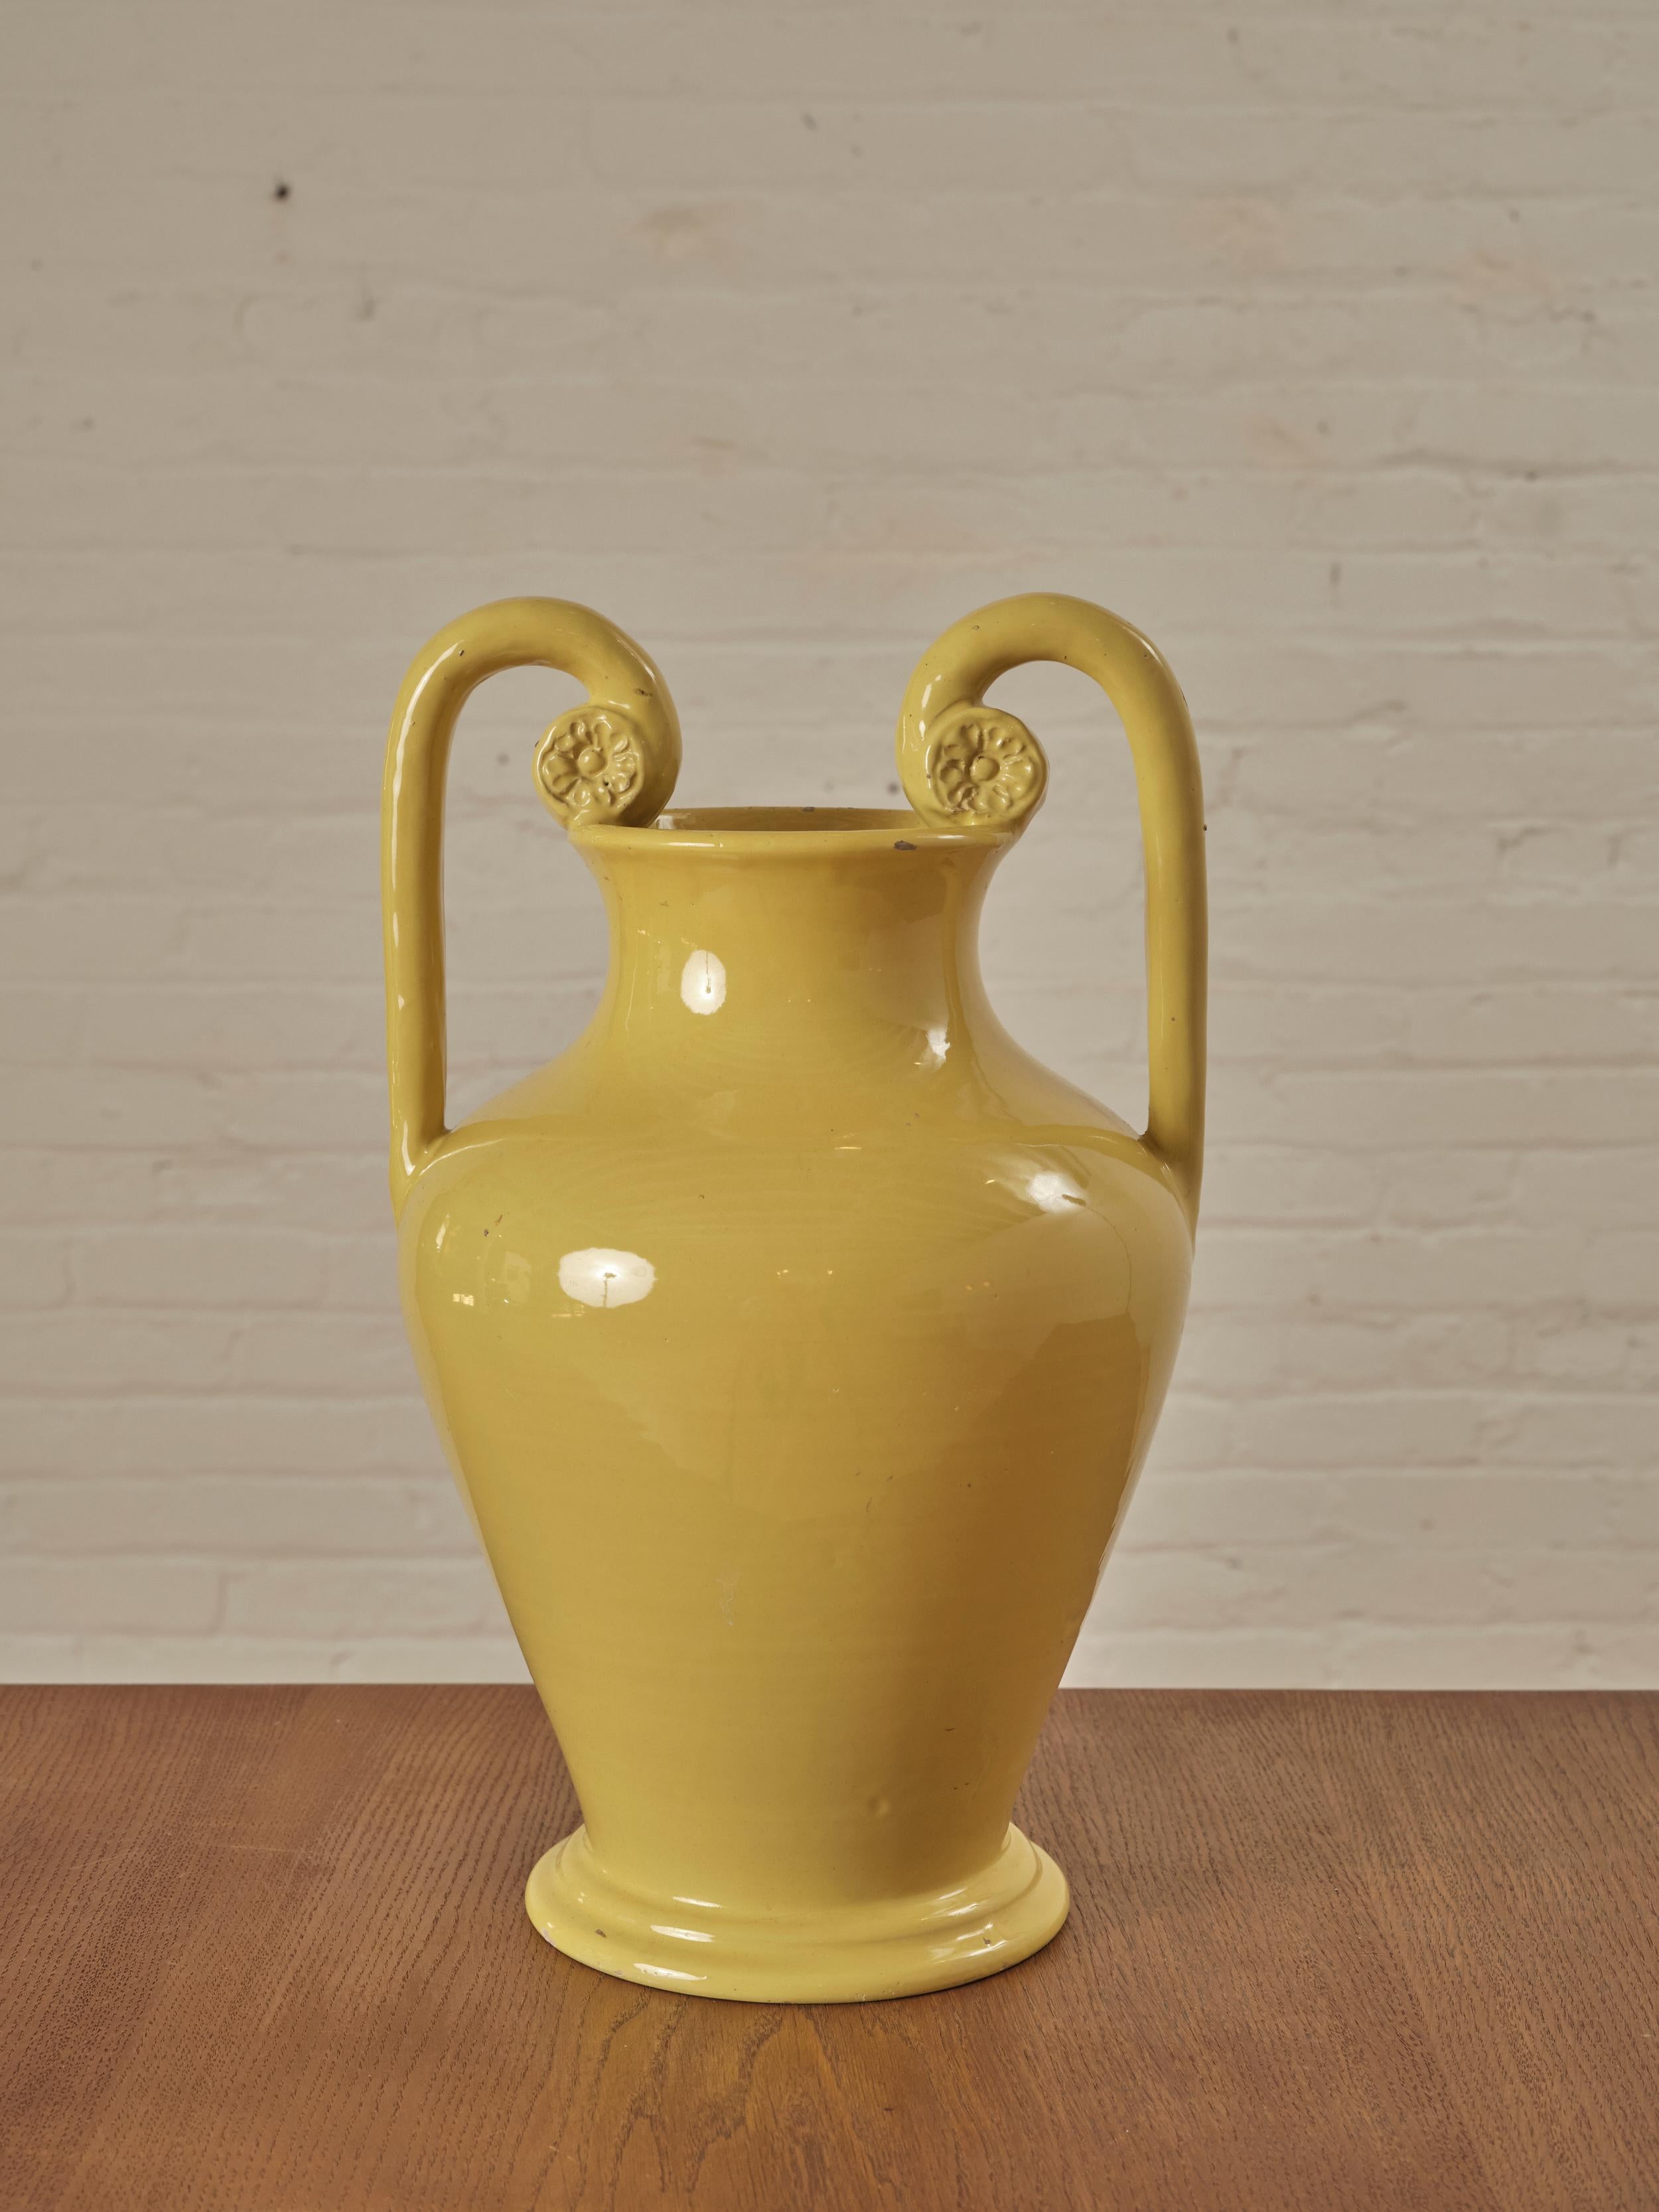 Italian Ceramic Vase with a mustard glaze, features two gracefully curved handles. With its medium-sized stature, this vase can be showcased as a standalone decorative piece or filled with flowers.

